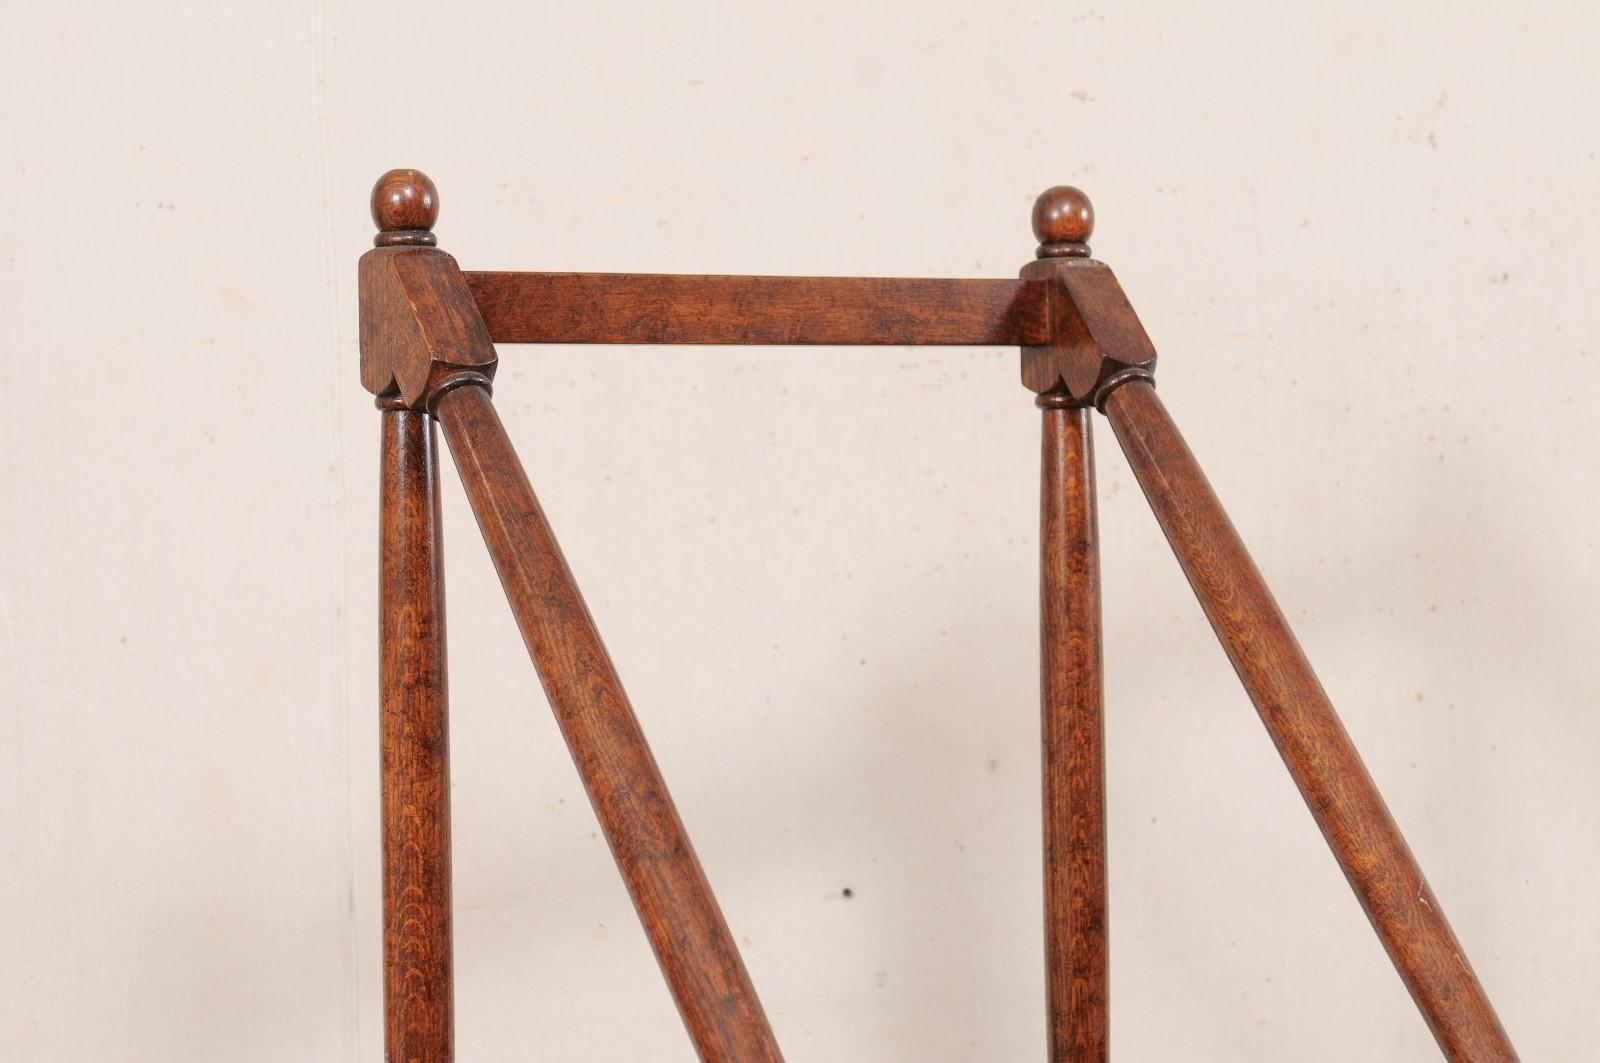 English Carved-Wood Library Step Ladder Would Also Be a Great Kitchen Piece 1